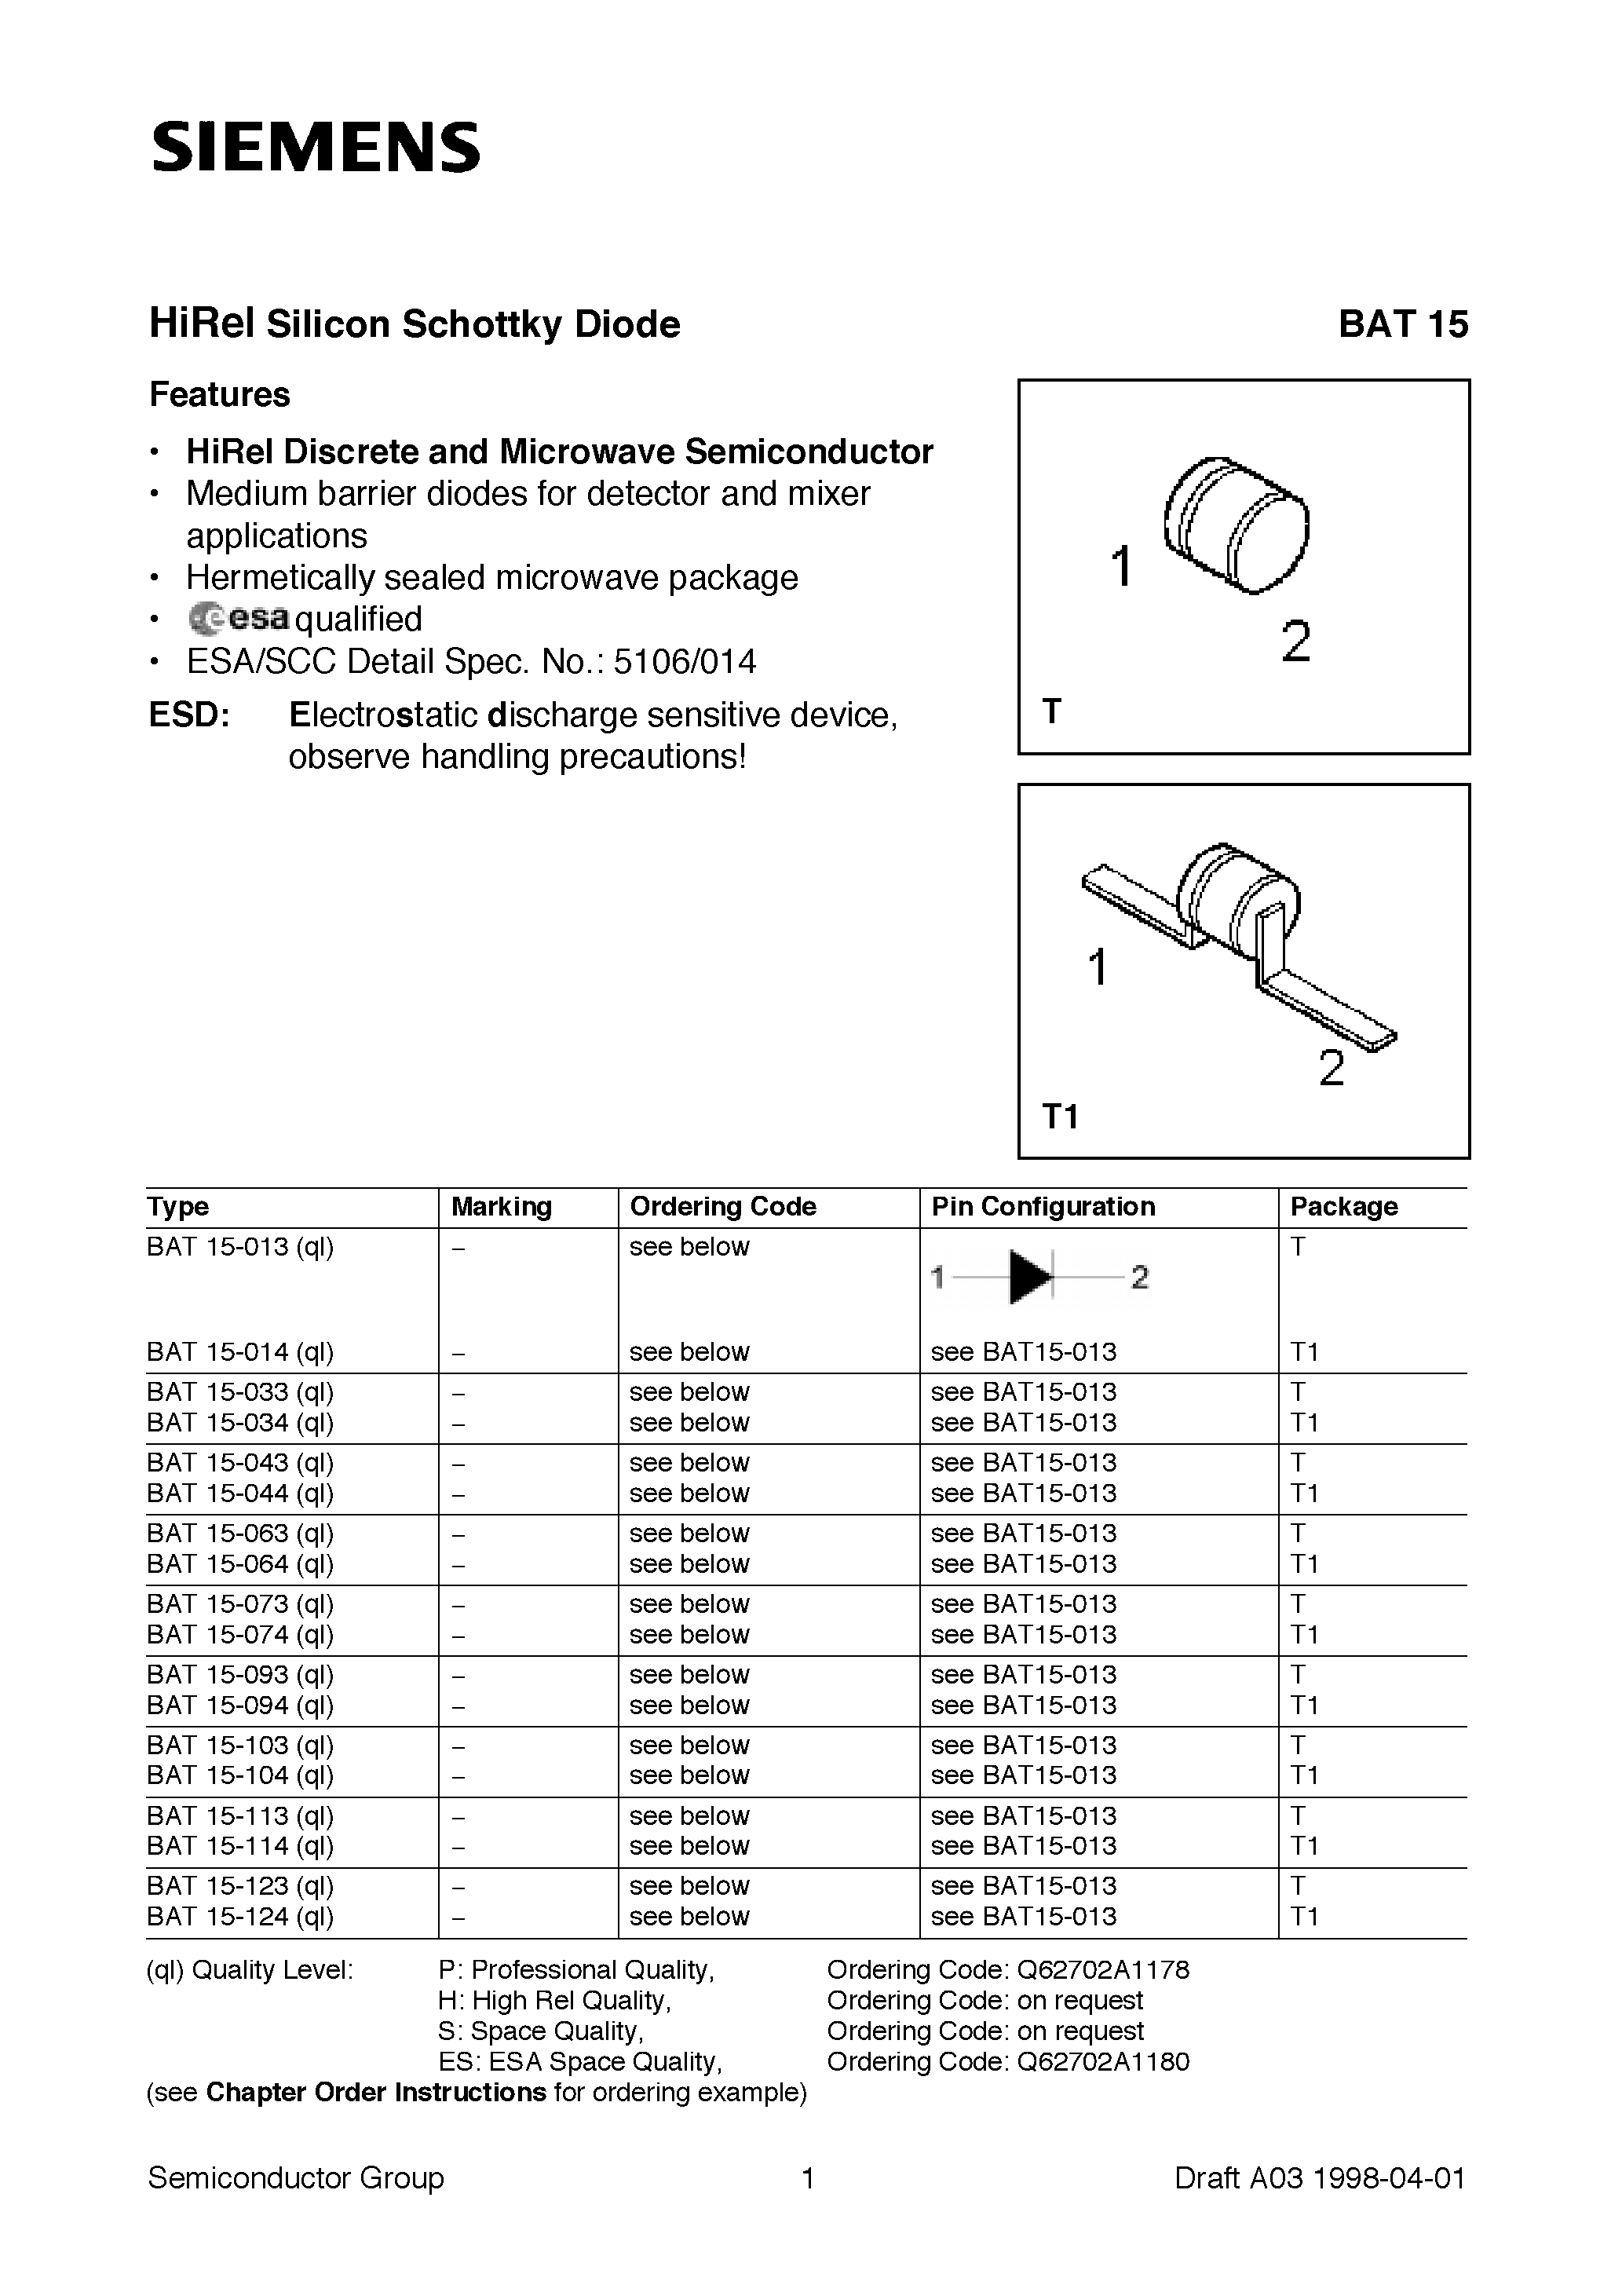 Datasheet BAT15-034 - HiRel Silicon Schottky Diode (HiRel Discrete and Microwave Semiconductor Medium barrier diodes for detector and mixer applications) page 1